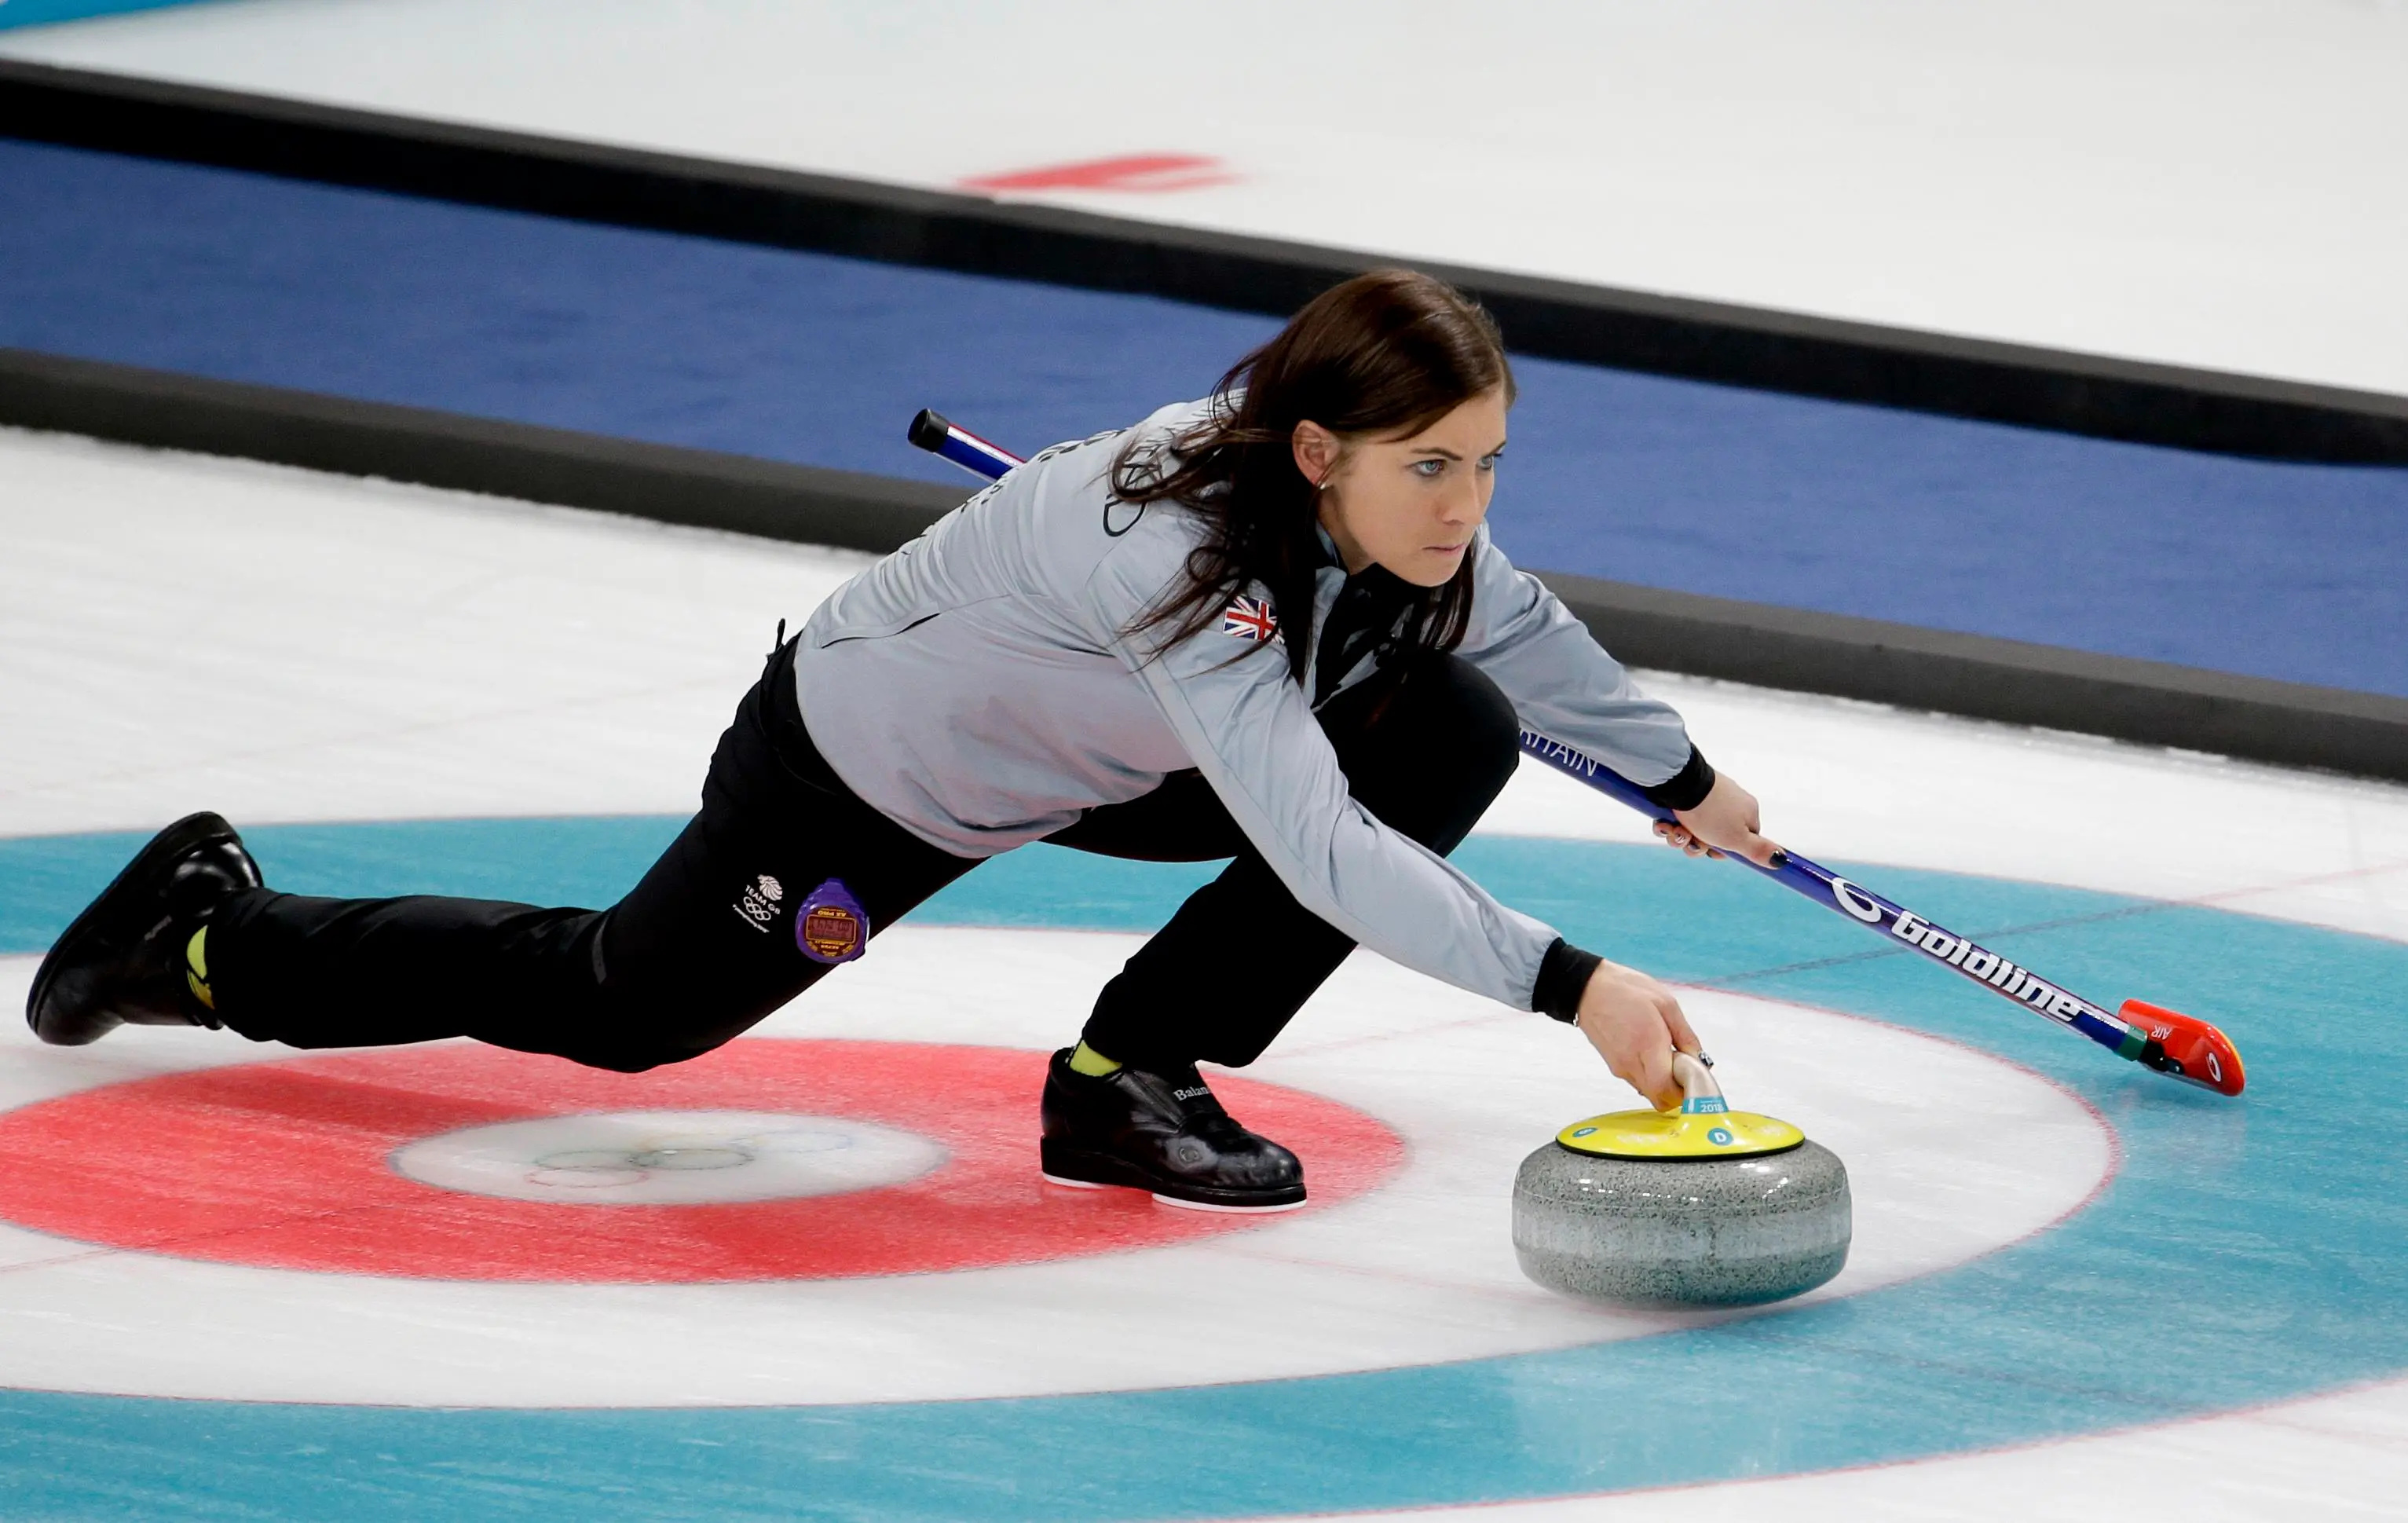 Curling: Eve Muirhead, The 2022 Beijing Winter Olympic Games Champion. 3070x1940 HD Wallpaper.